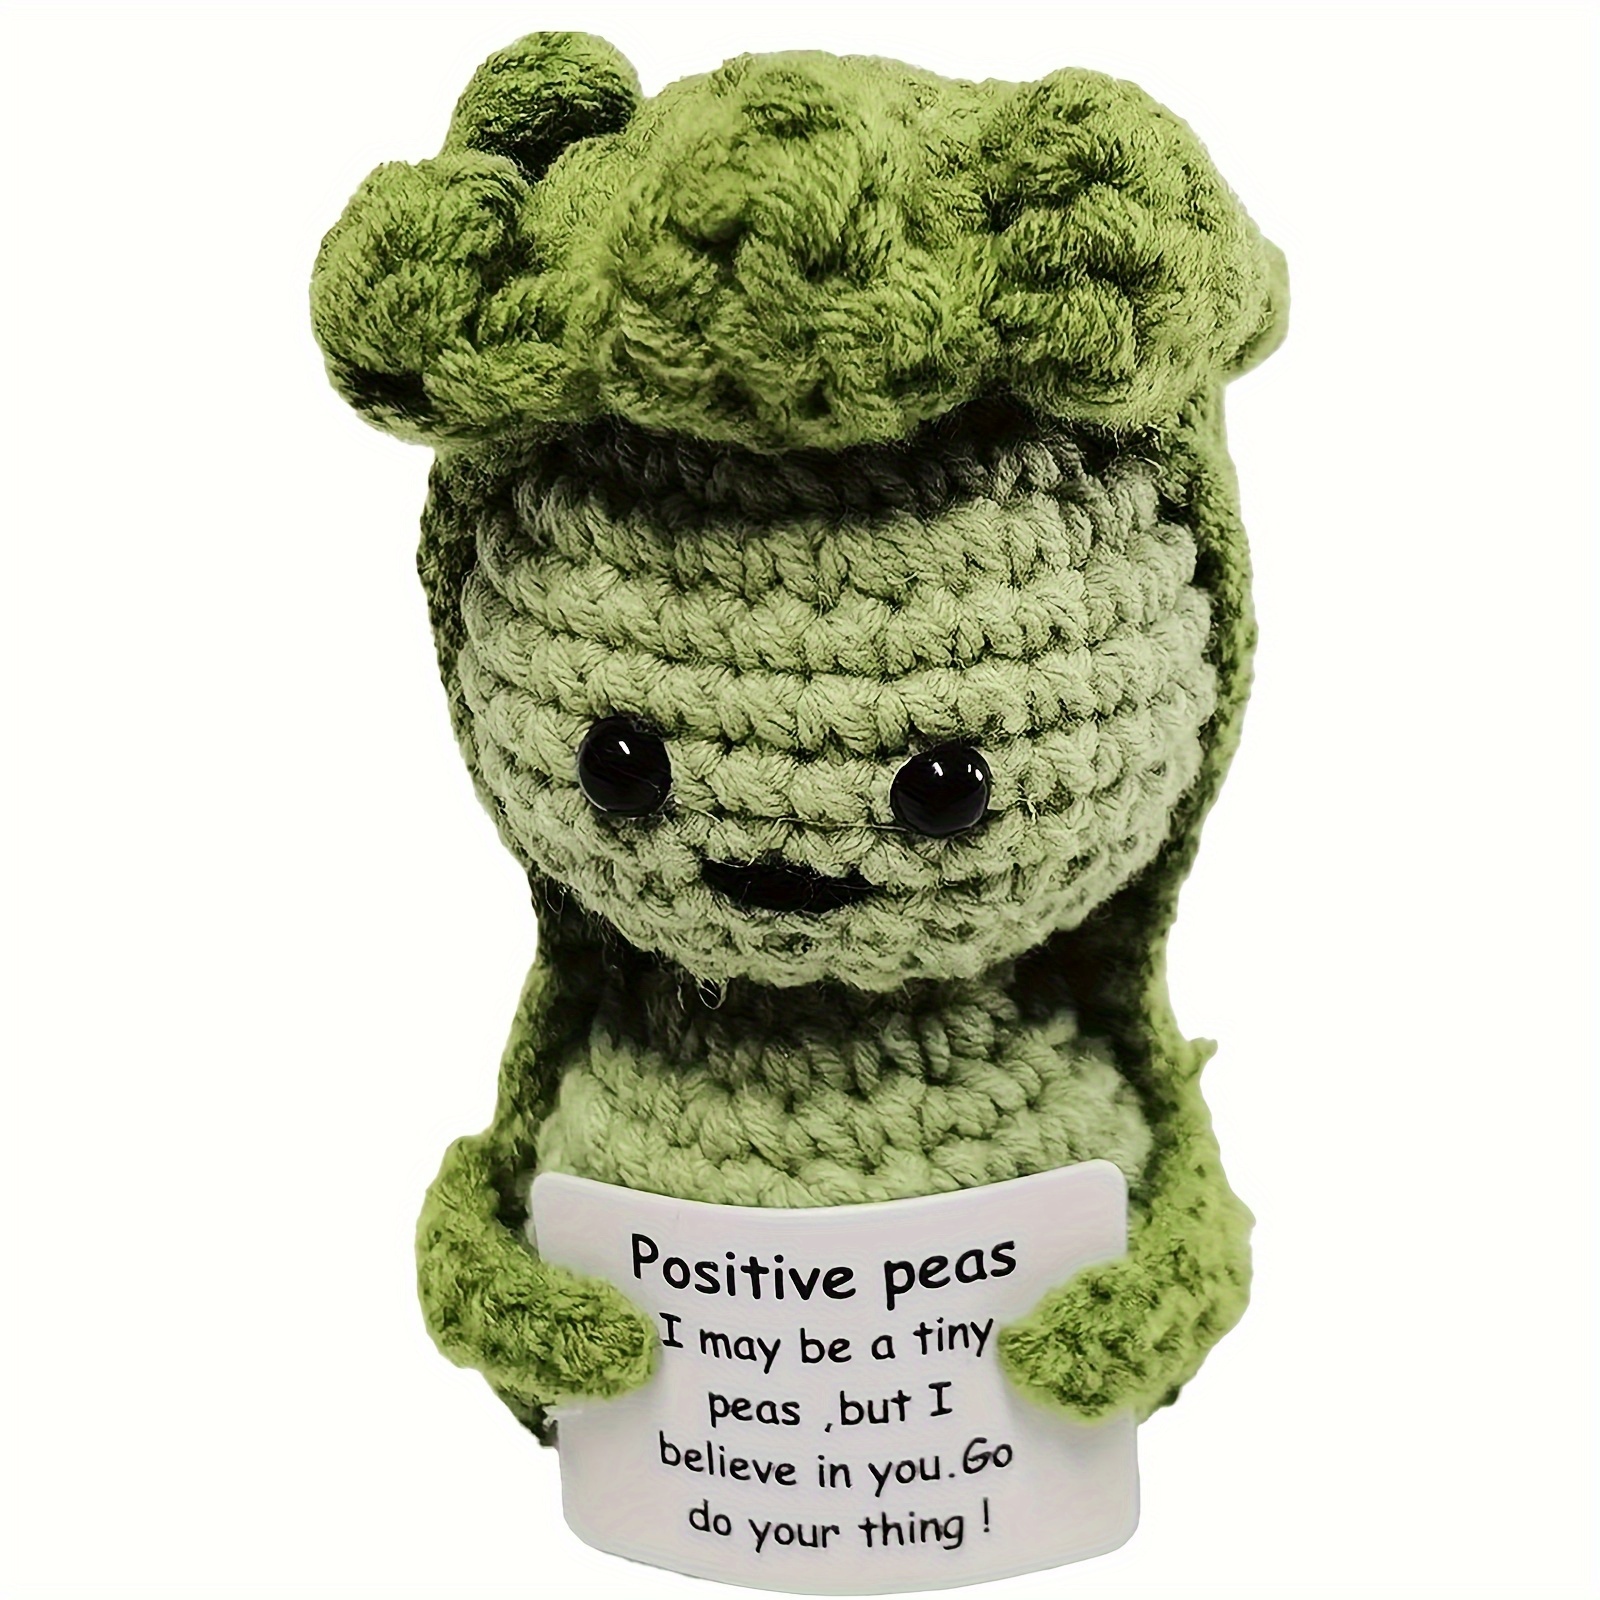 With Positive Card Funny Positive Potato Handmade Wool Knitted Potato Doll  Plush Doll Toy – the best products in the Joom Geek online store